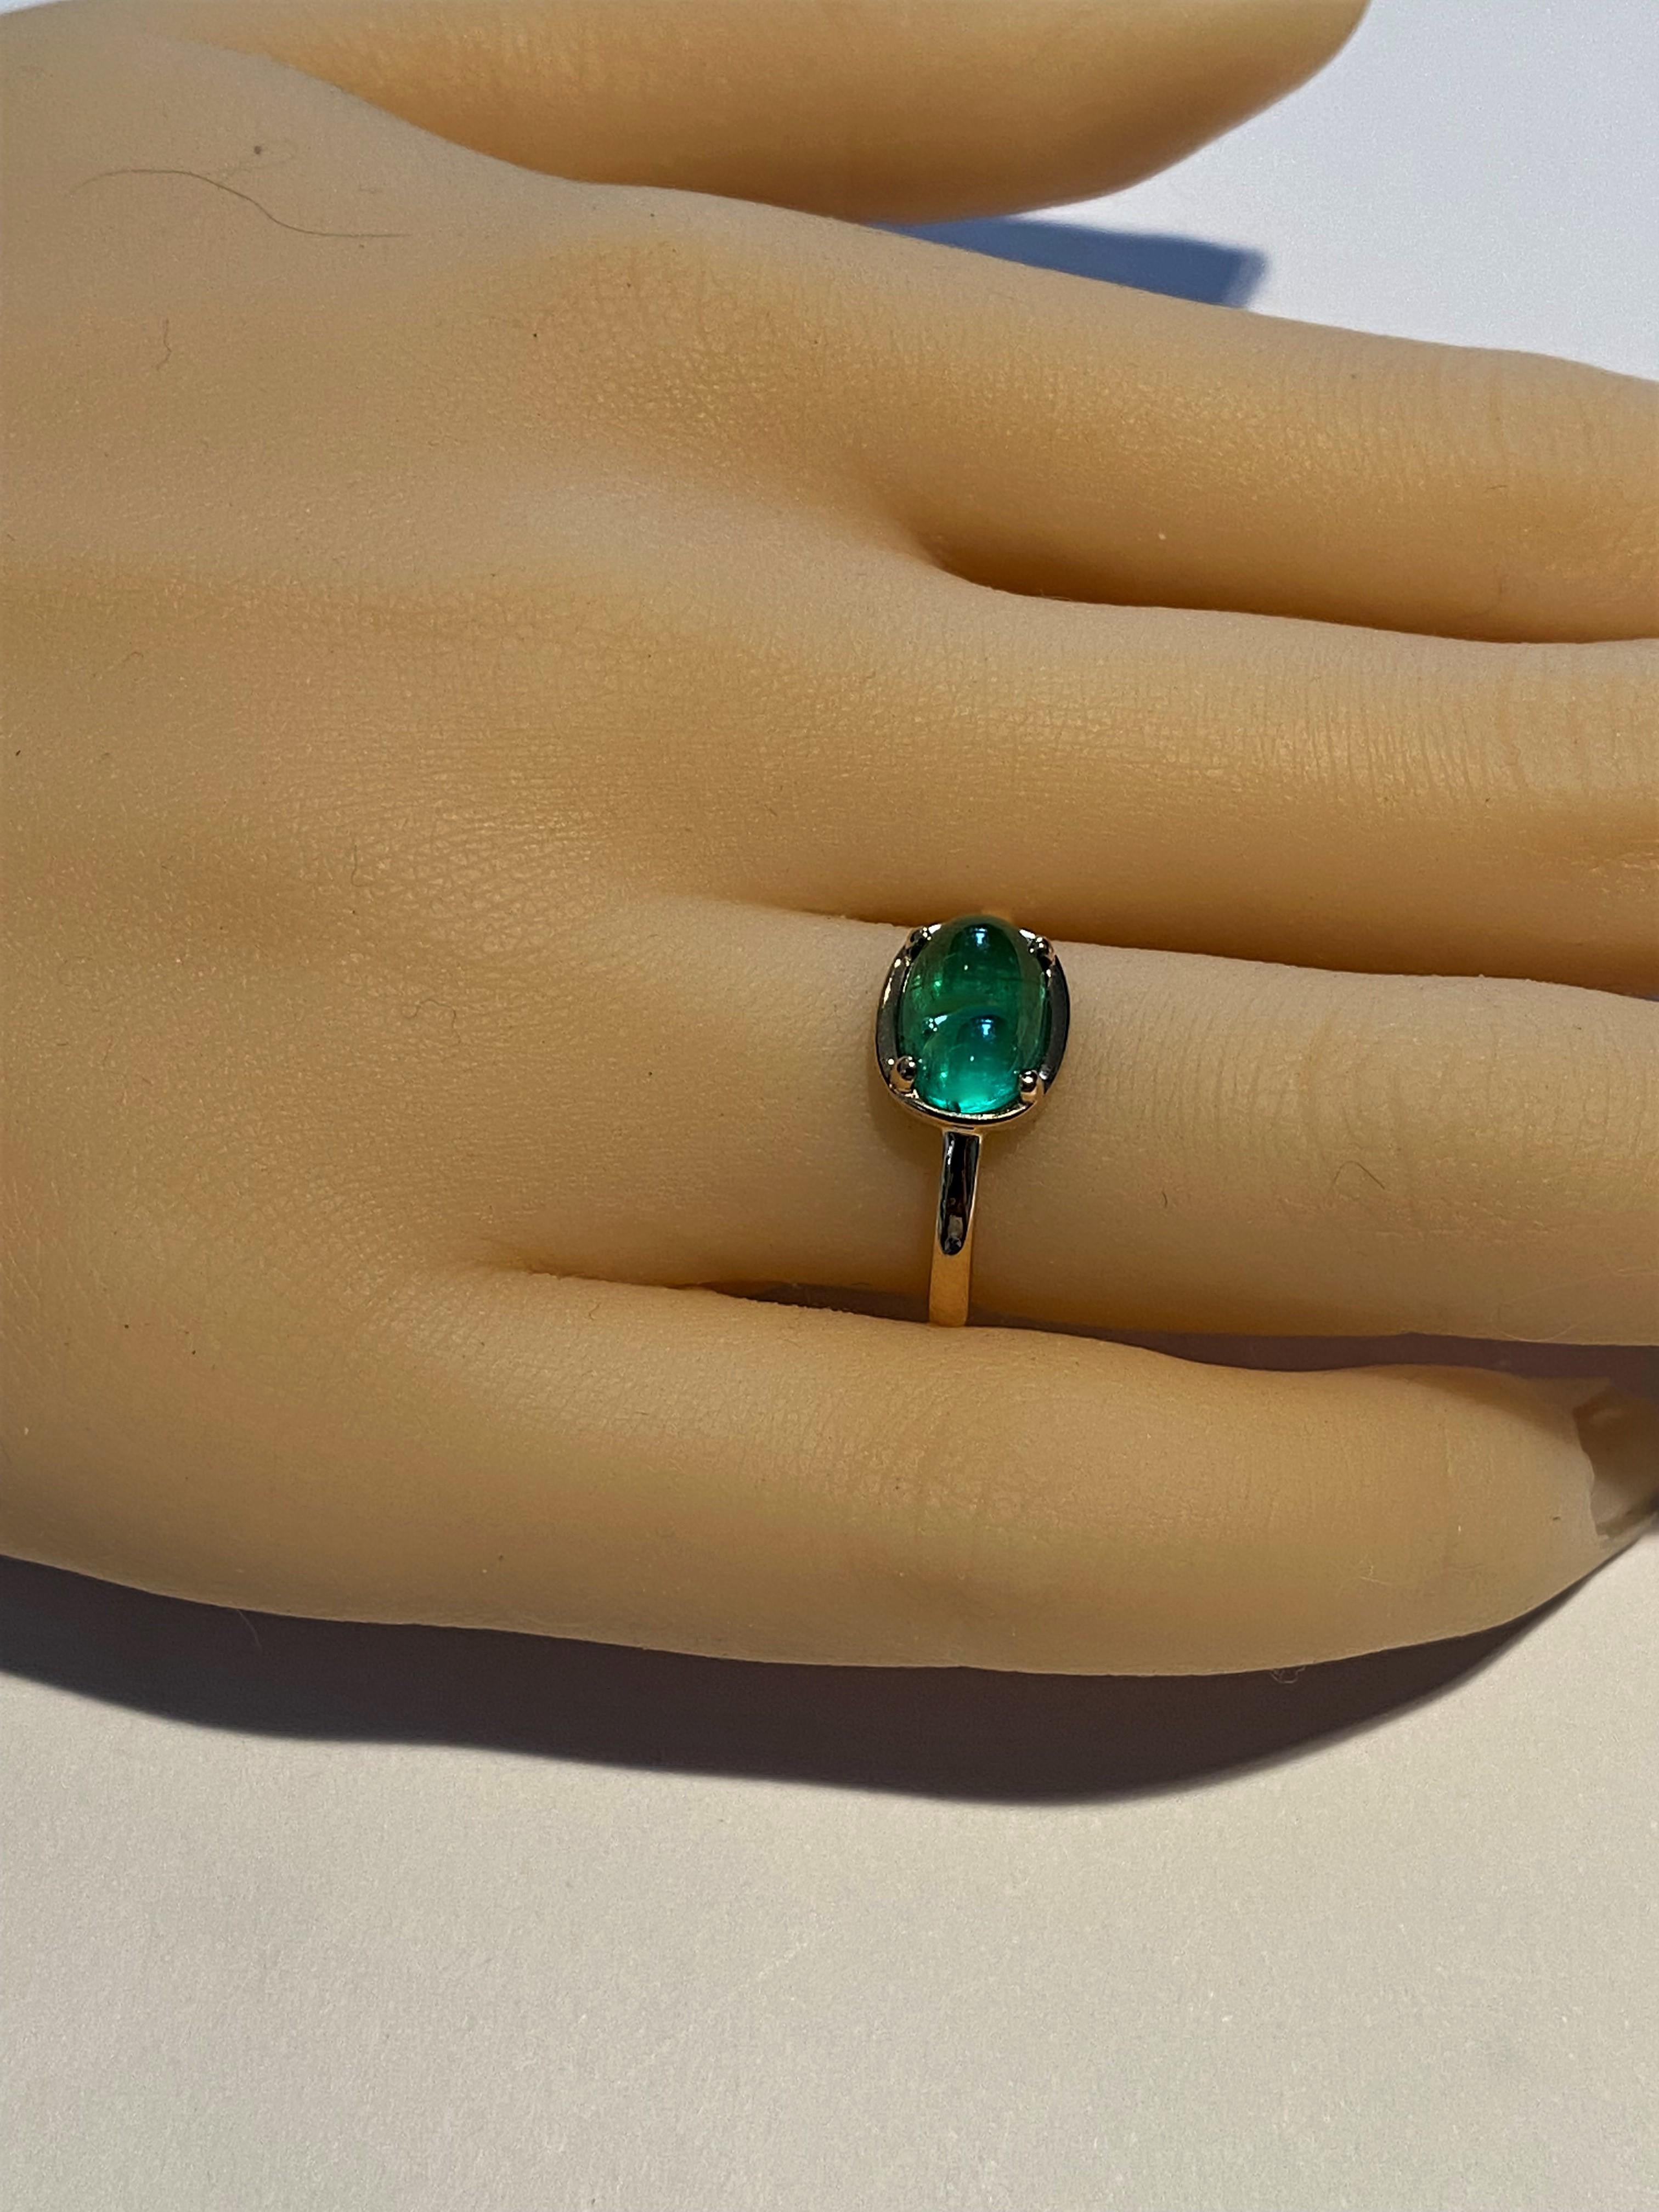 Contemporary Cabochon Emerald Solitaire Rose Gold Ring Weighing 2.40 Carats